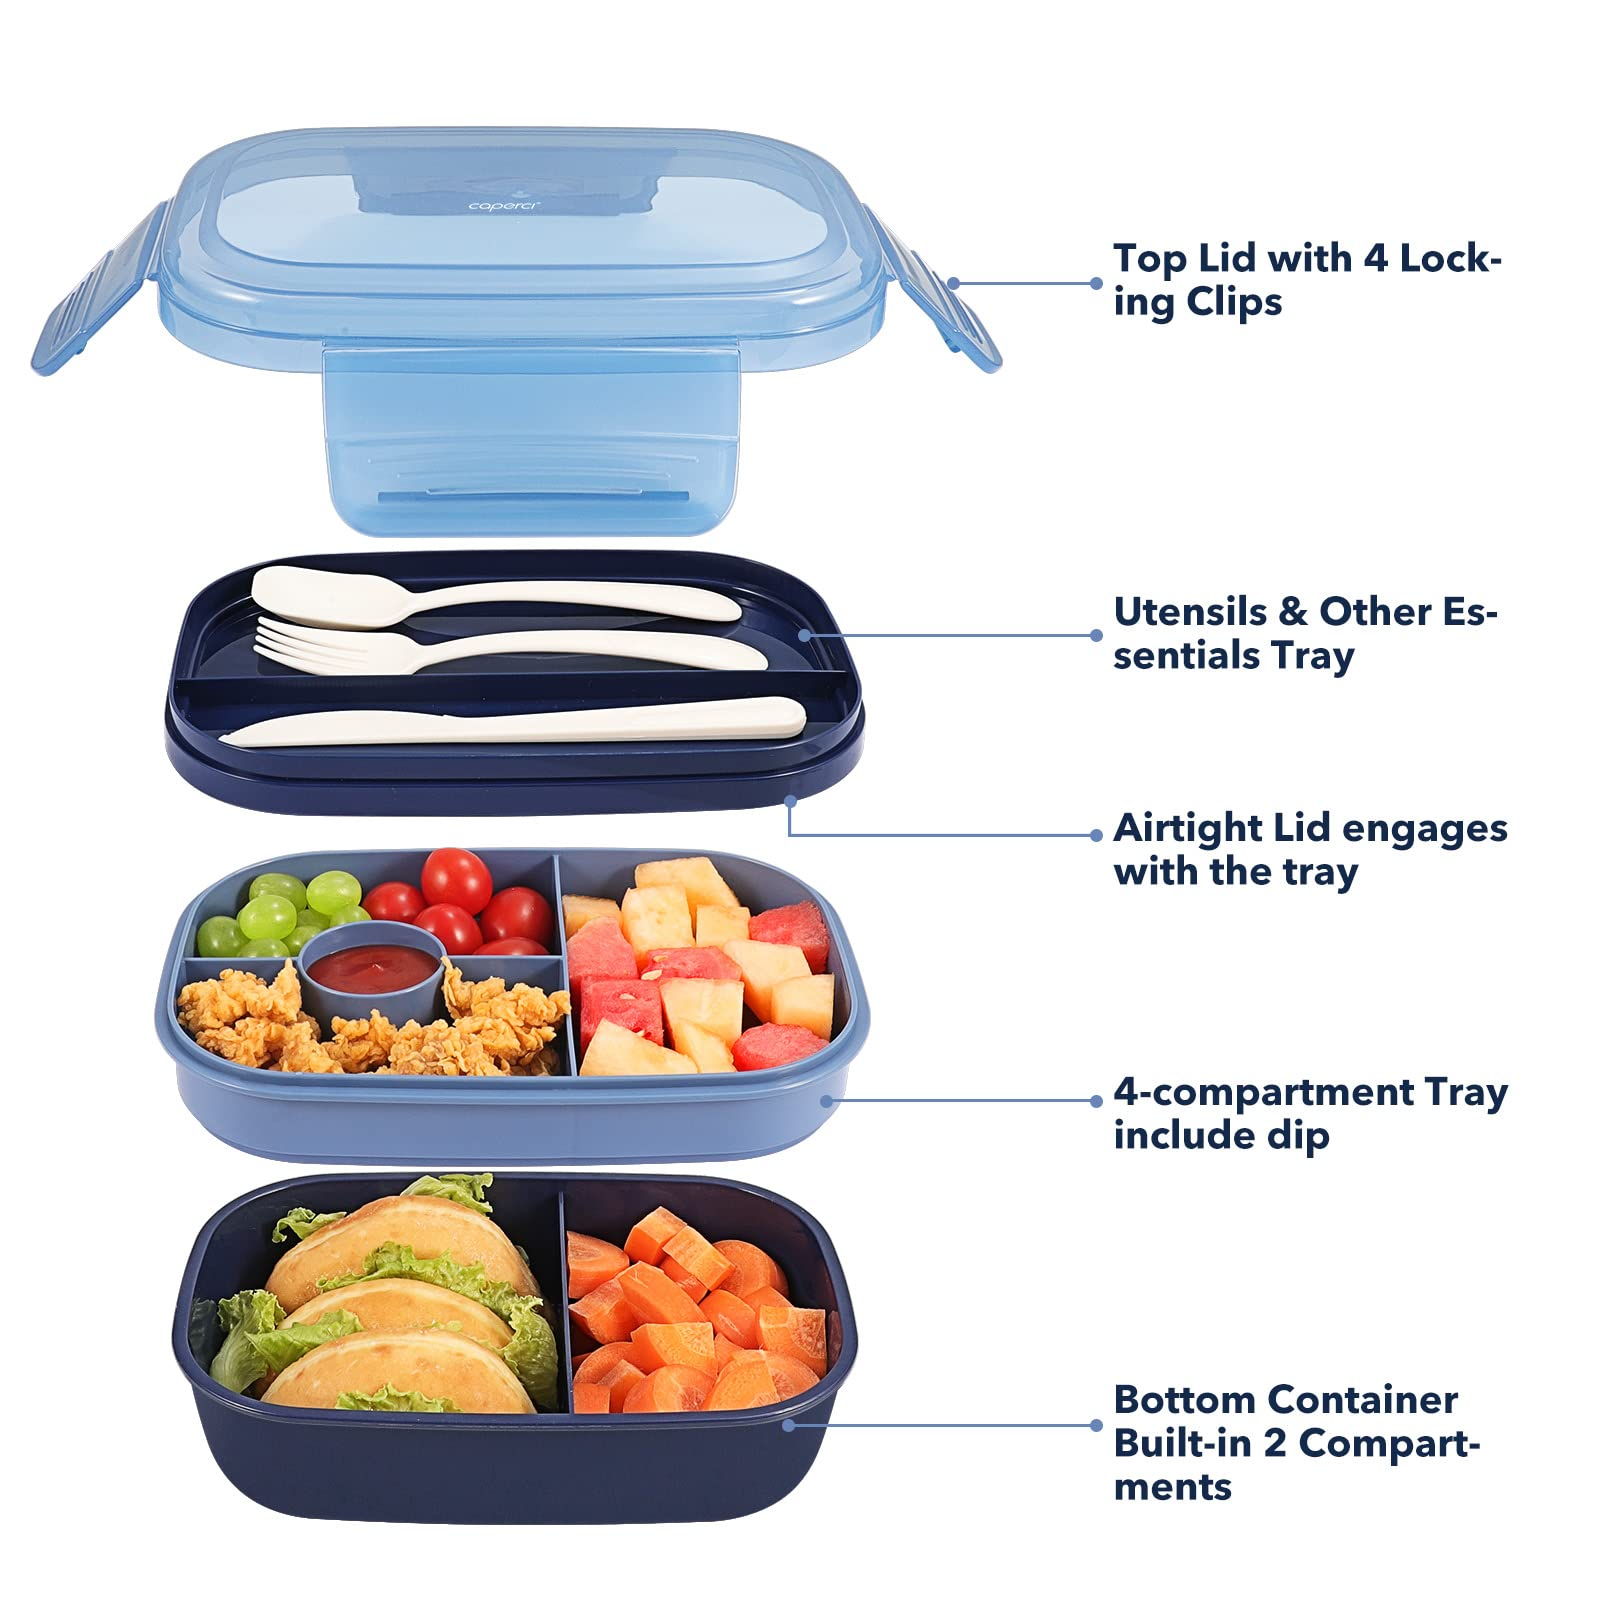  Caperci Versatile Bento Lunch Box for Kids - Leakproof  6-Compartment Children's Lunch Container with Removable Compartment - Ideal  Portions Size for Ages 3 to 7, BPA-Free Materials (Blue) : Home & Kitchen